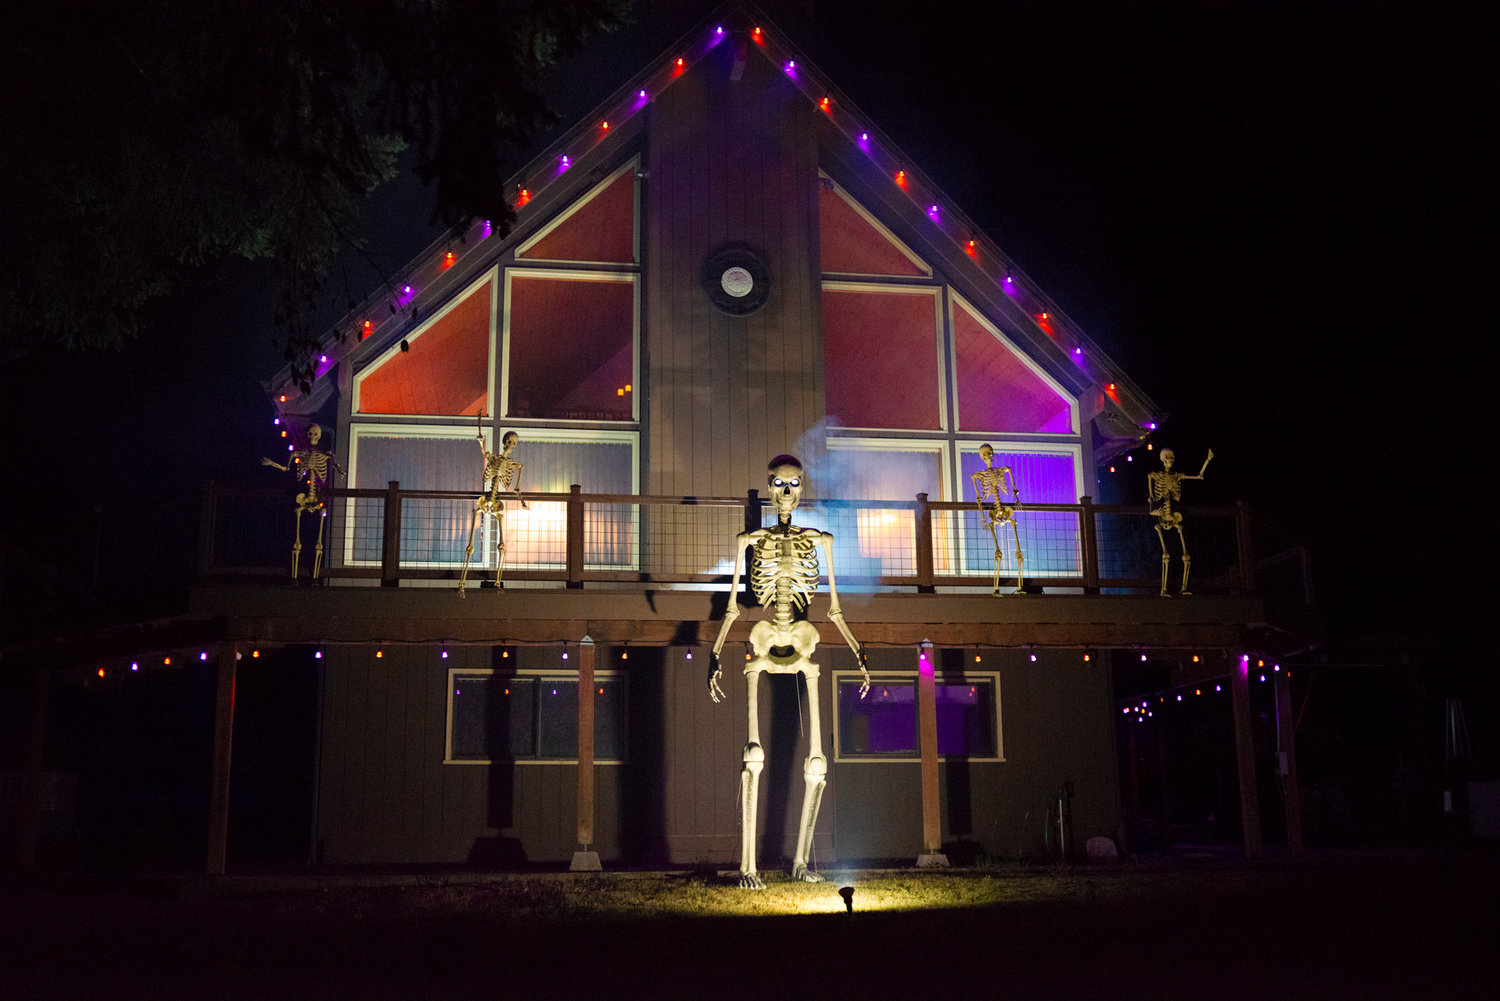 The home is located at 238 Frogner Road. Visitors are welcome any time after dark on Oct. 30 and Oct. 31.